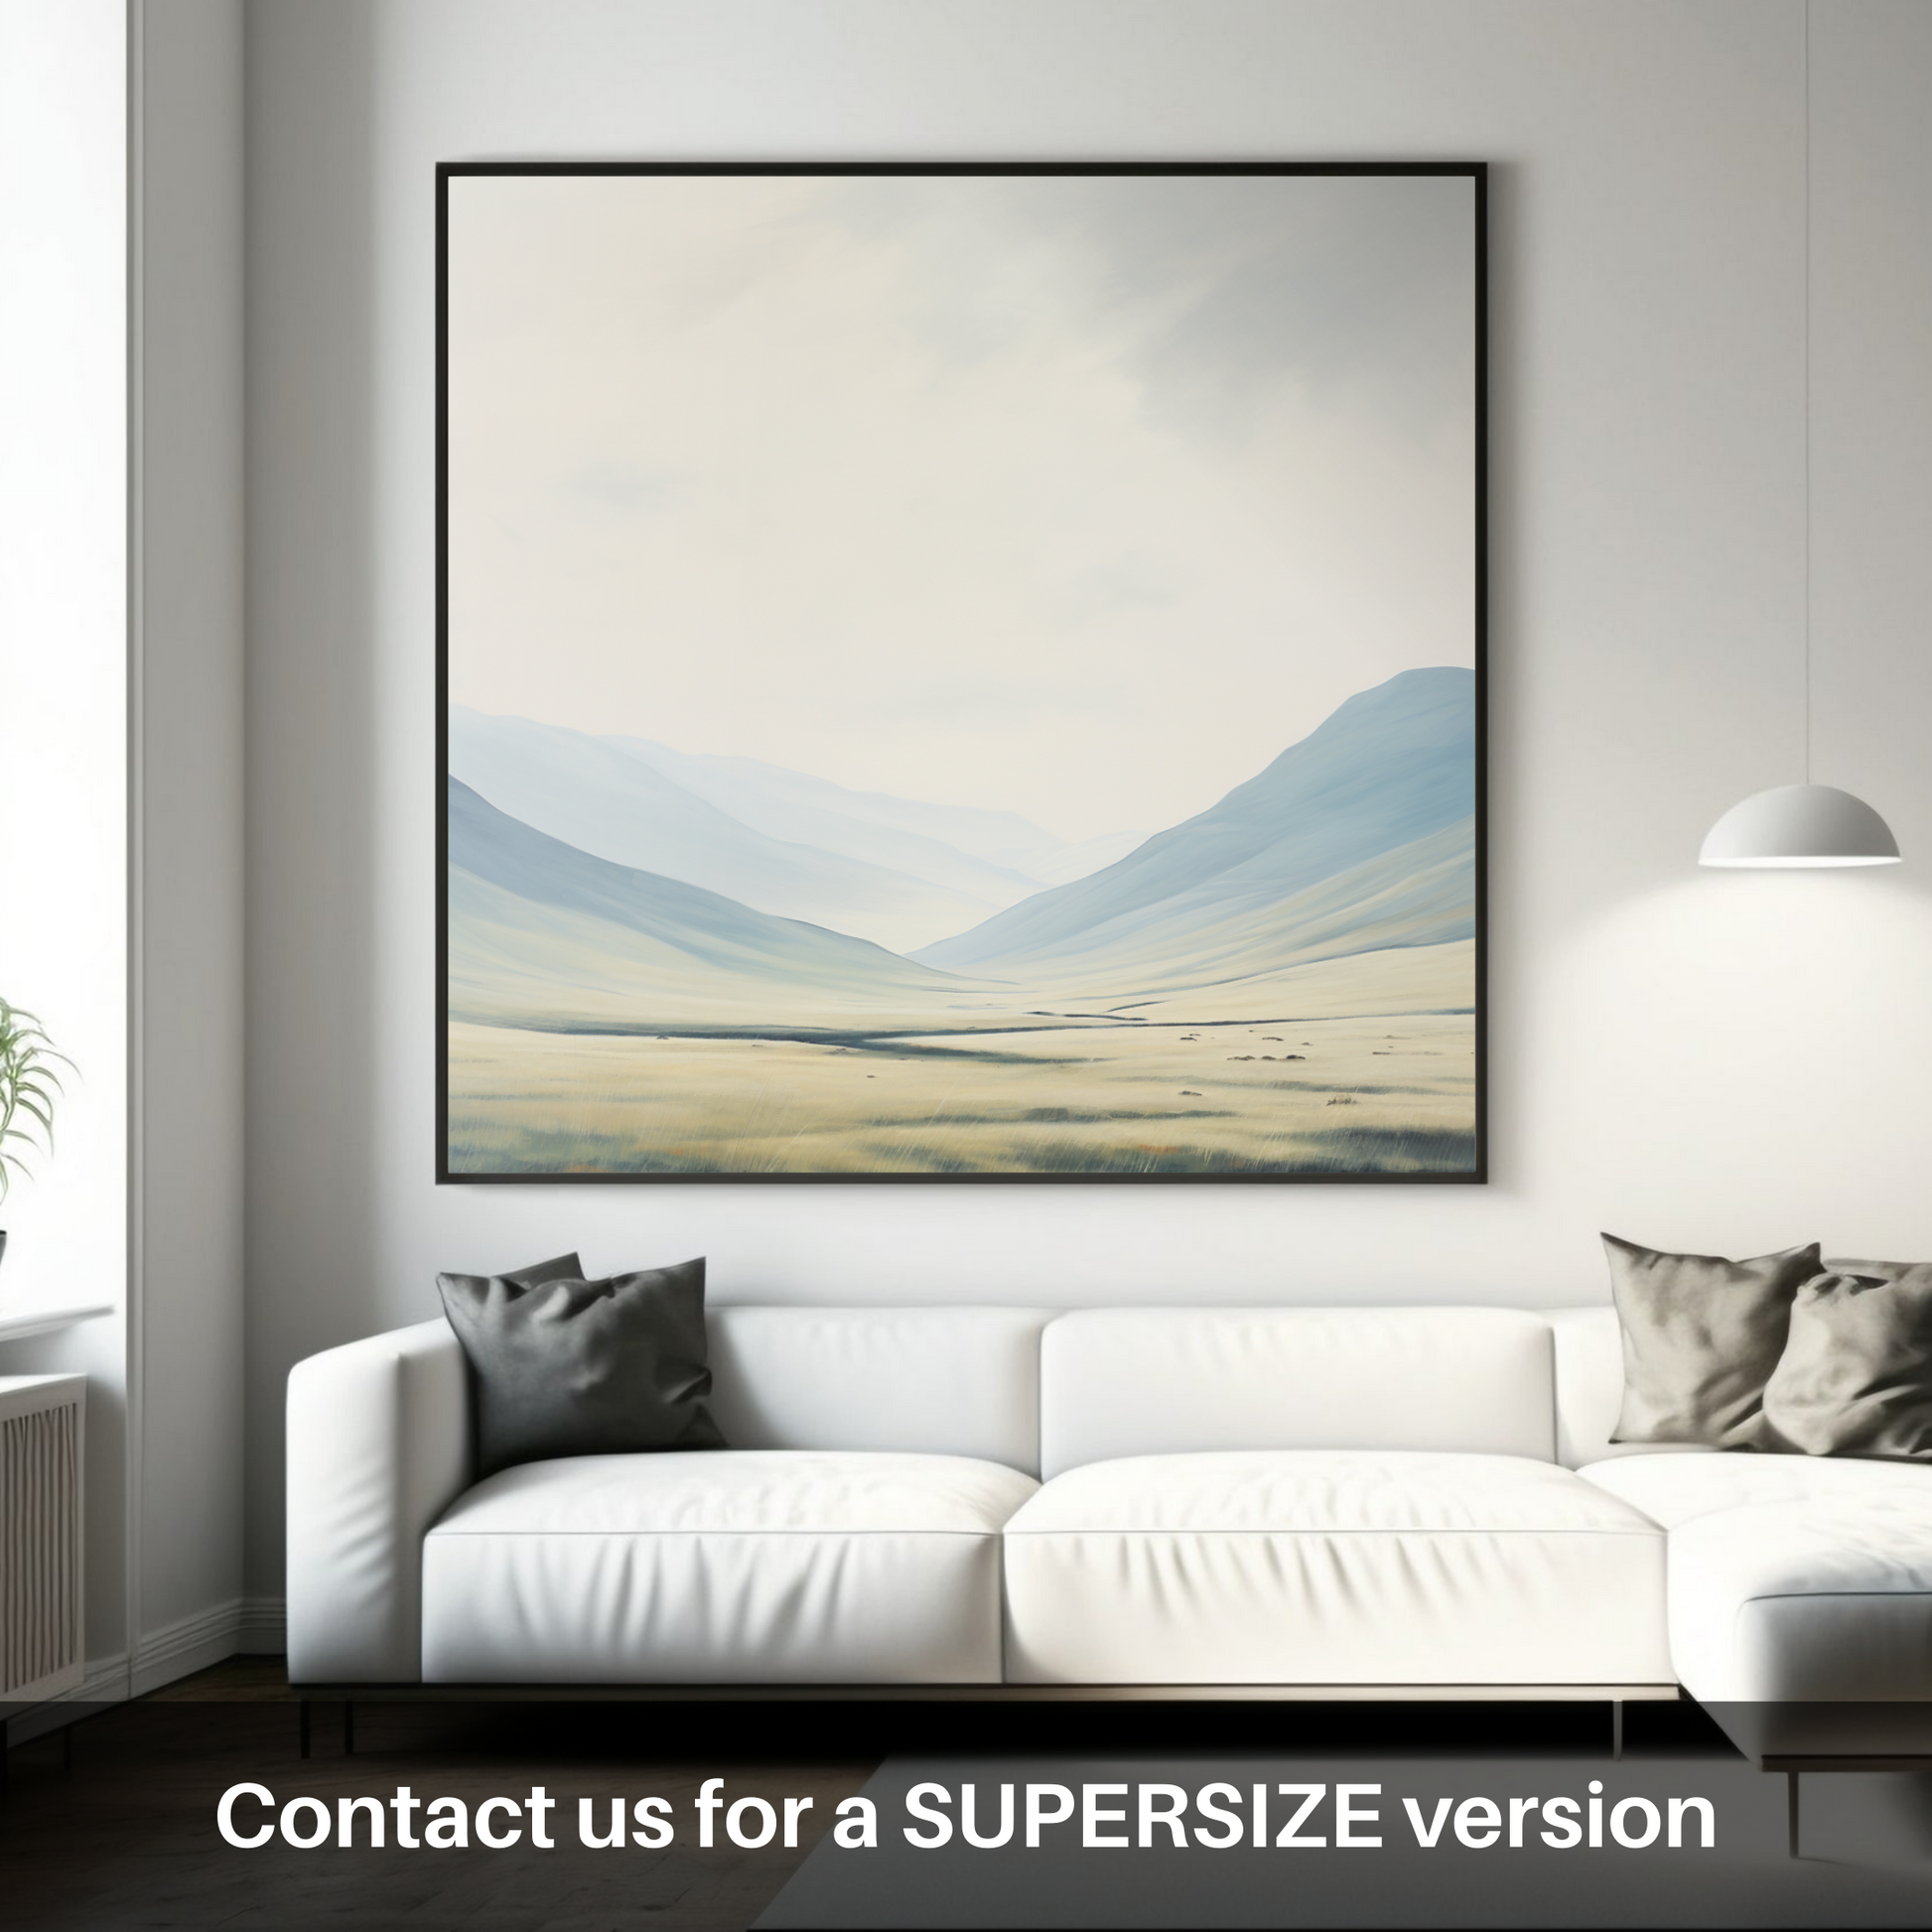 Huge supersize print of The Cairnwell